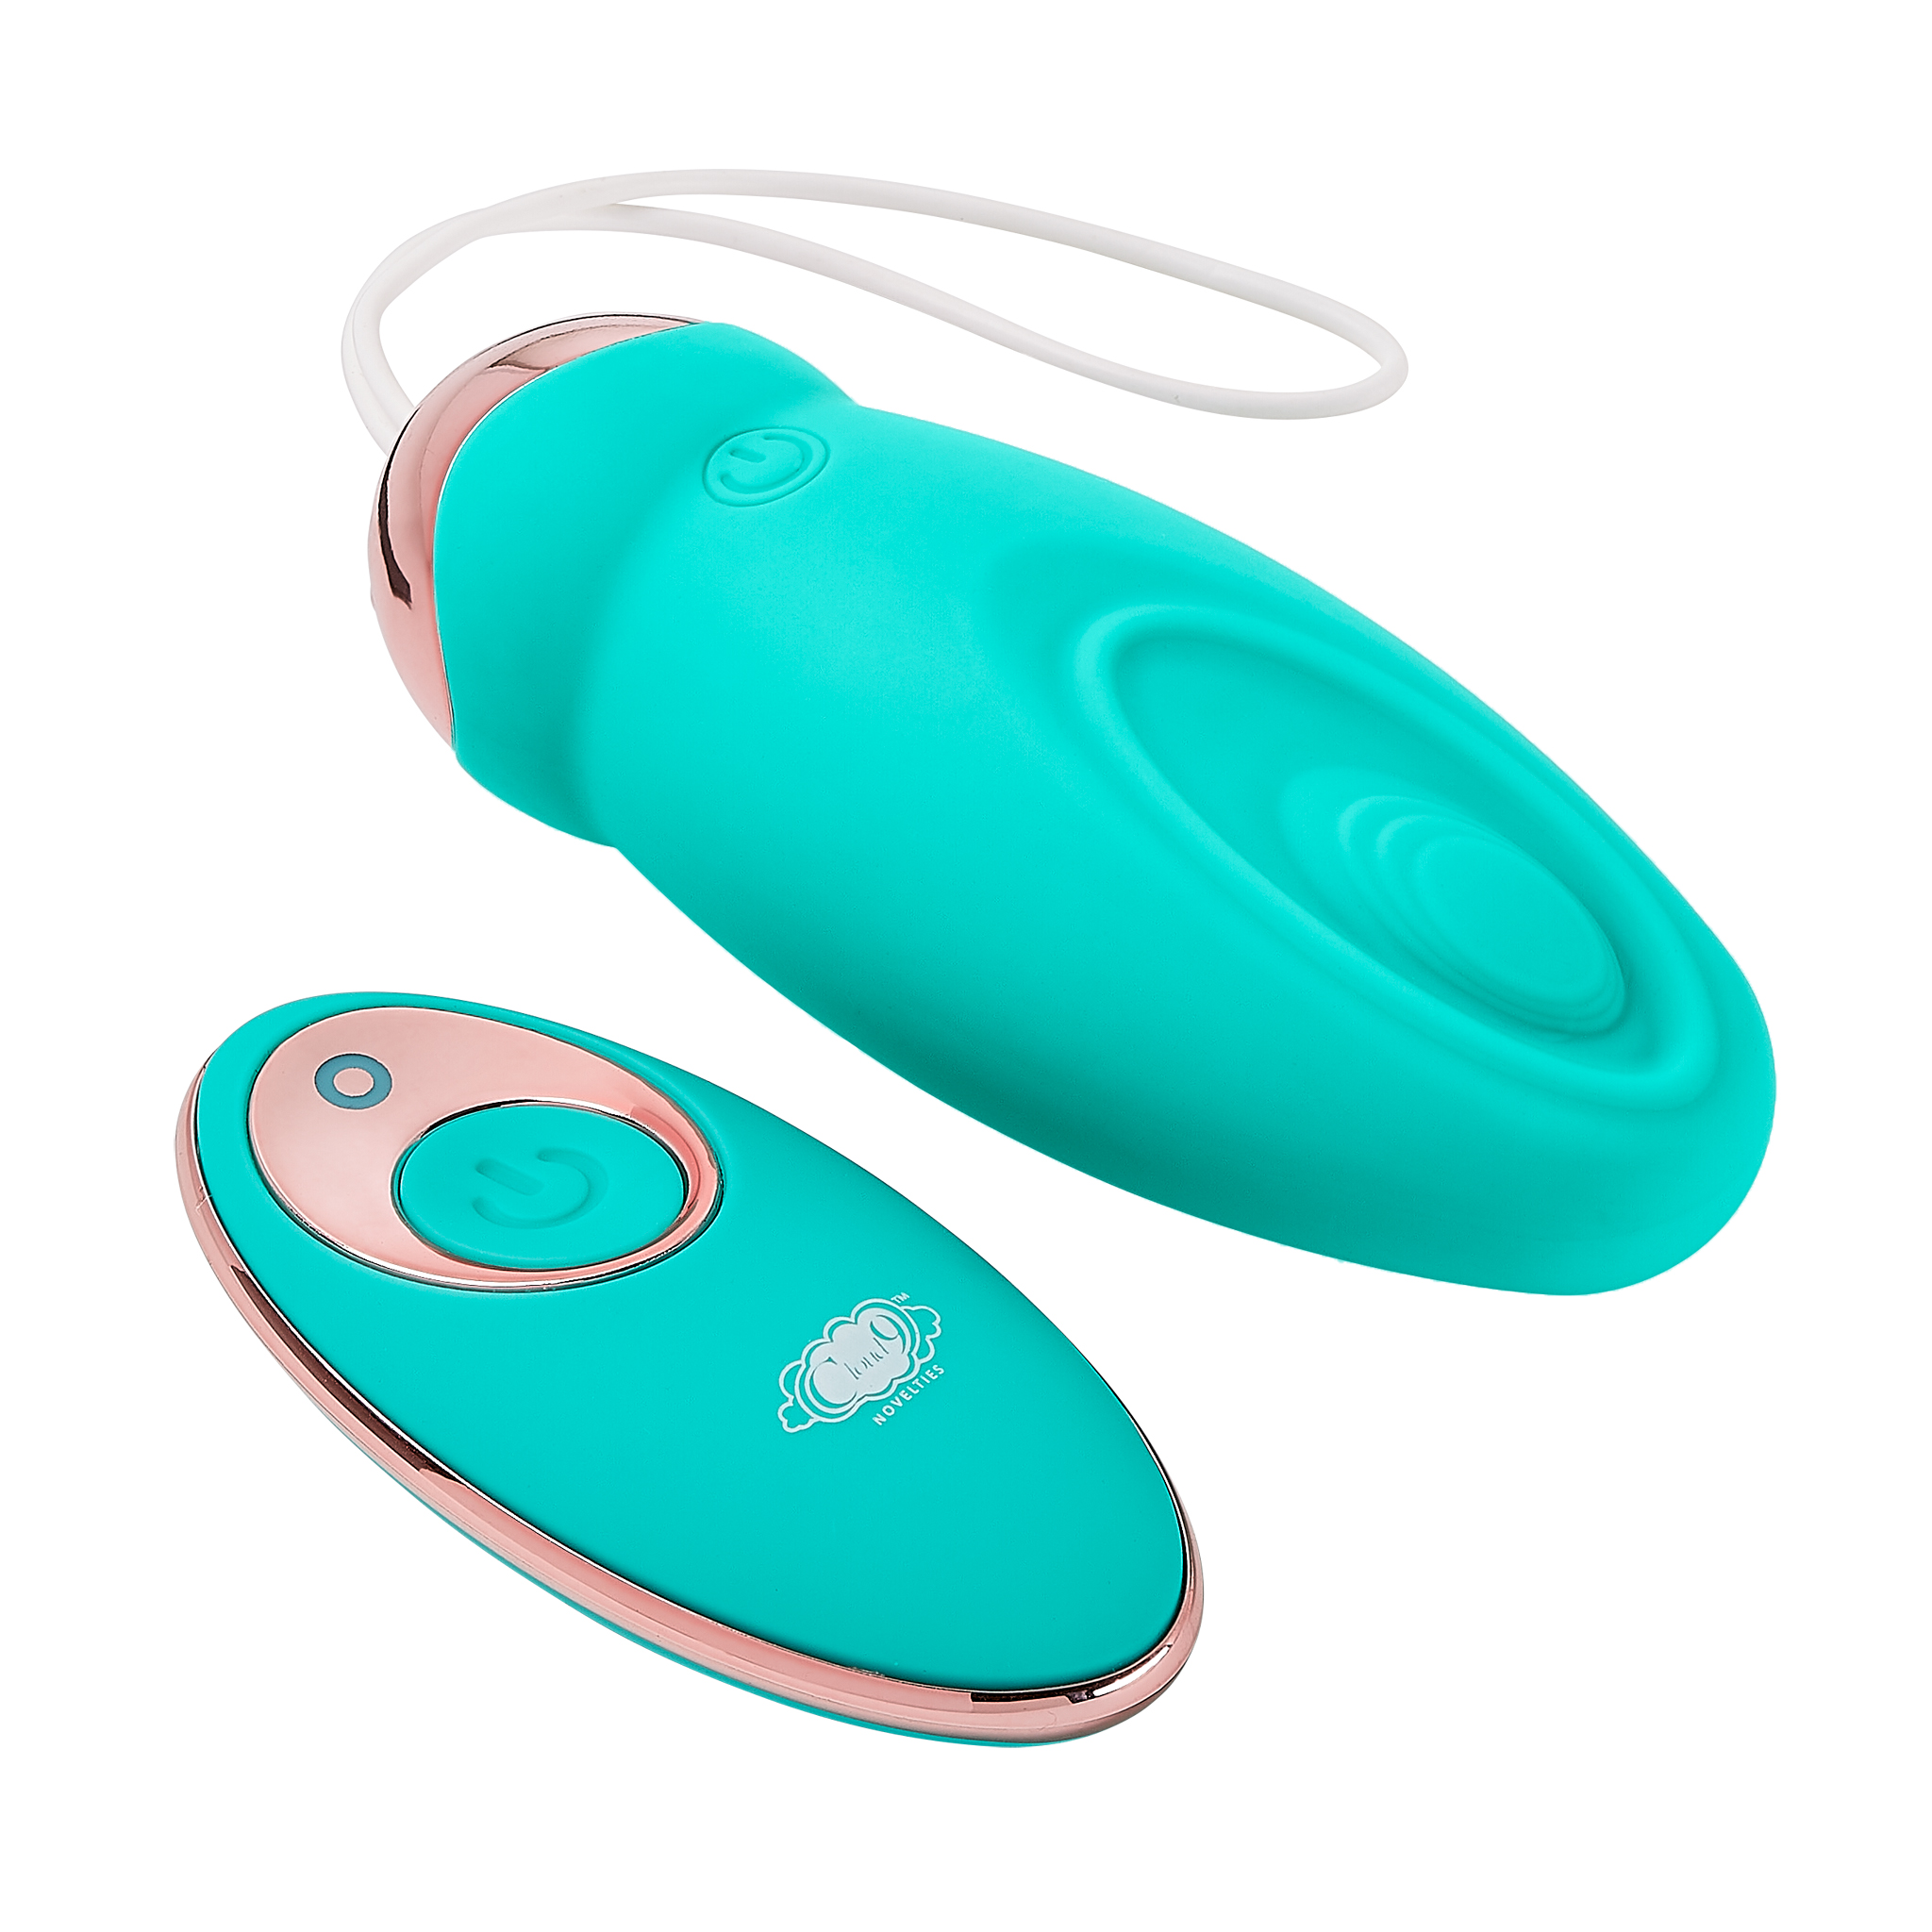 CLOUD 9 HEALTH & WELLNESS WIRELESS REMOTE CONTROL EGG W/ PULSATING MOTION TEAL